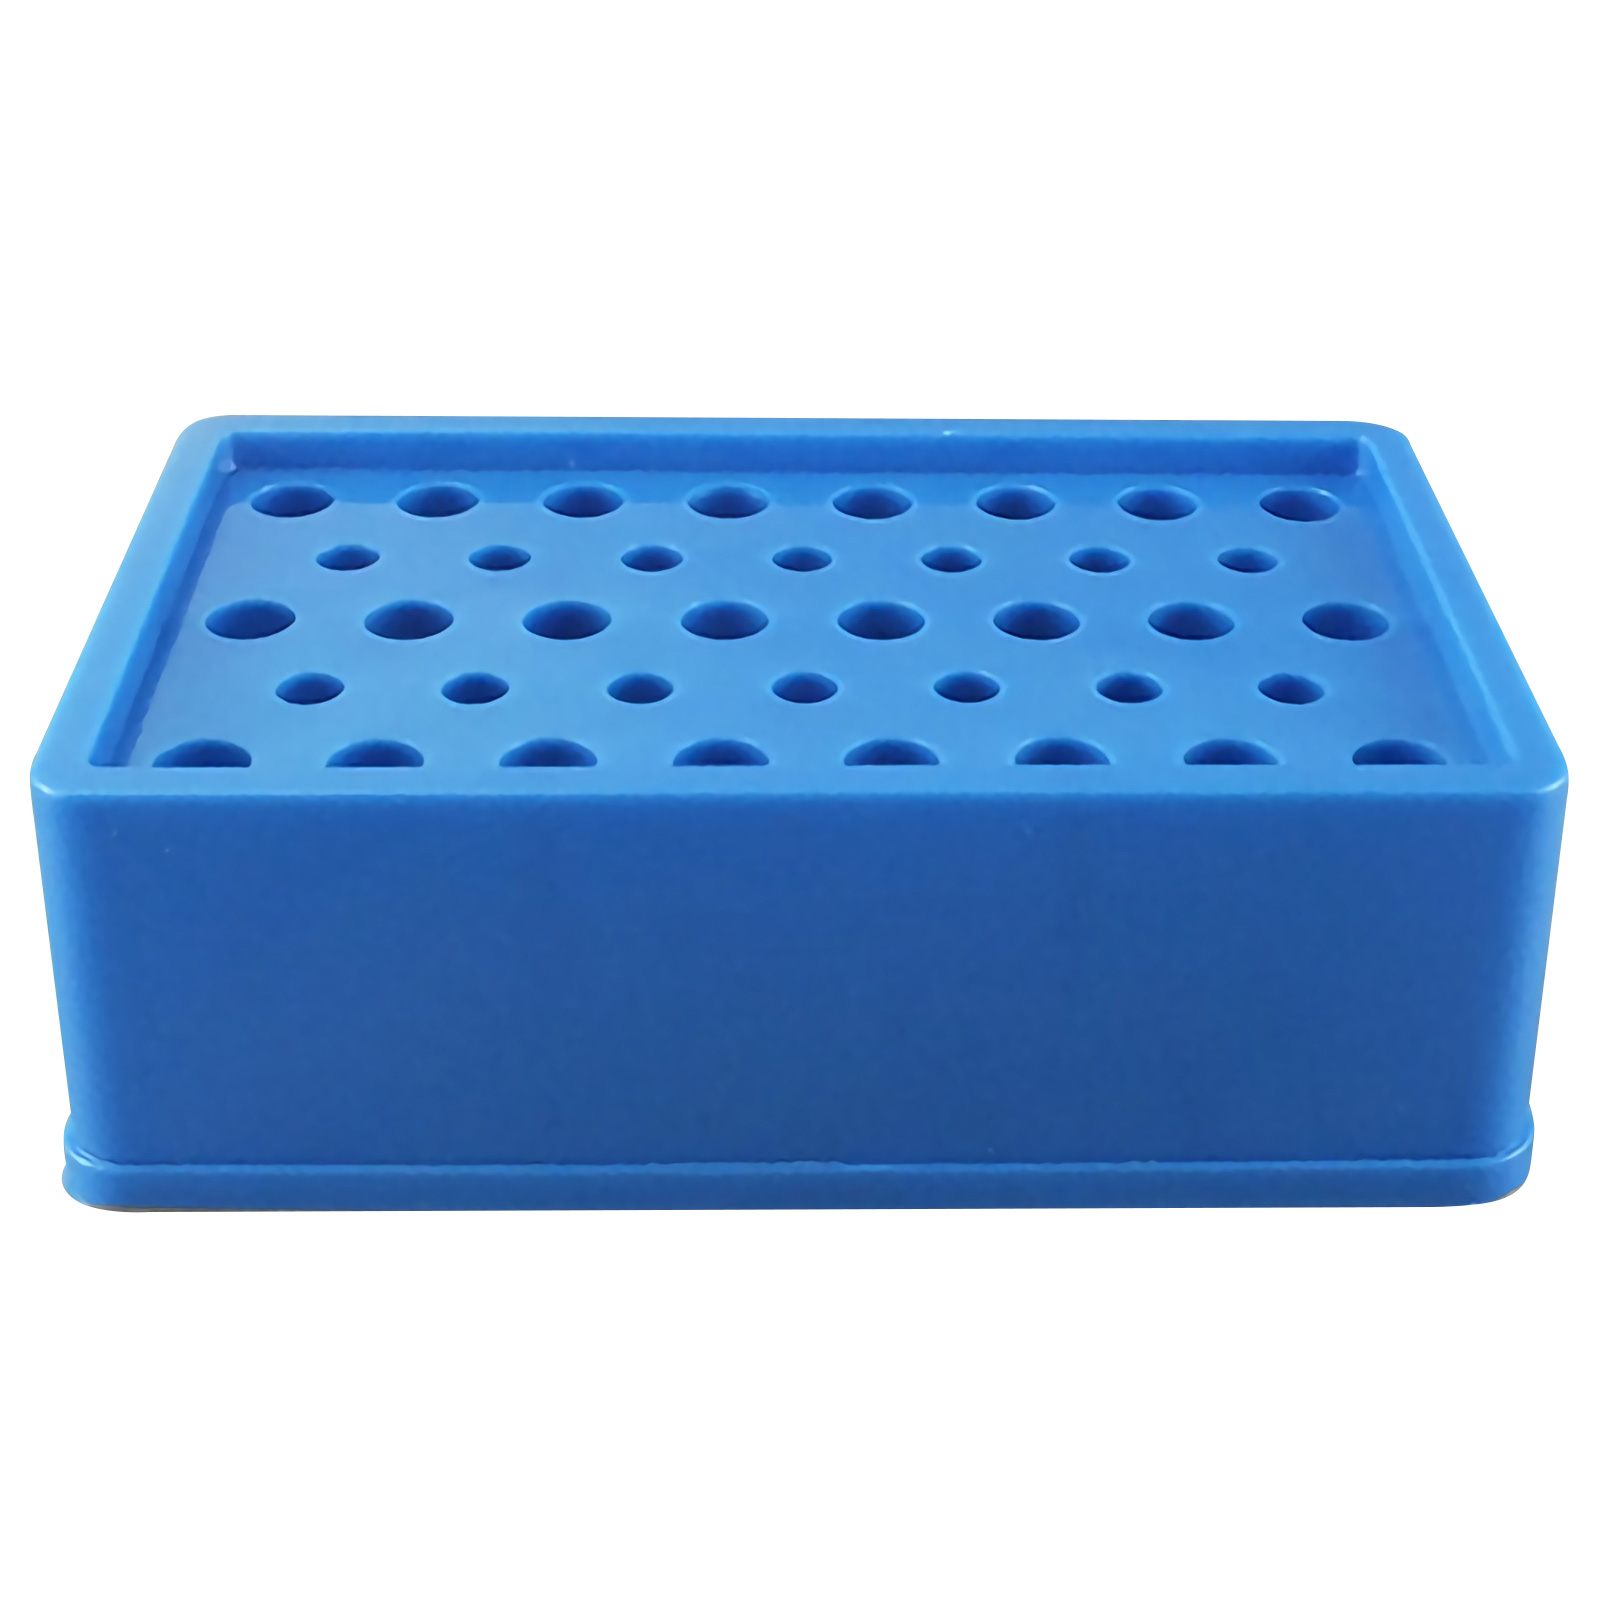 ADAMAS BETA PP Plastic PCR Ice Box 38-Well Laboratory Freezer Box Suitable 0.5ml/2ml Centrifugal Tubes for PCR Biological Experiment